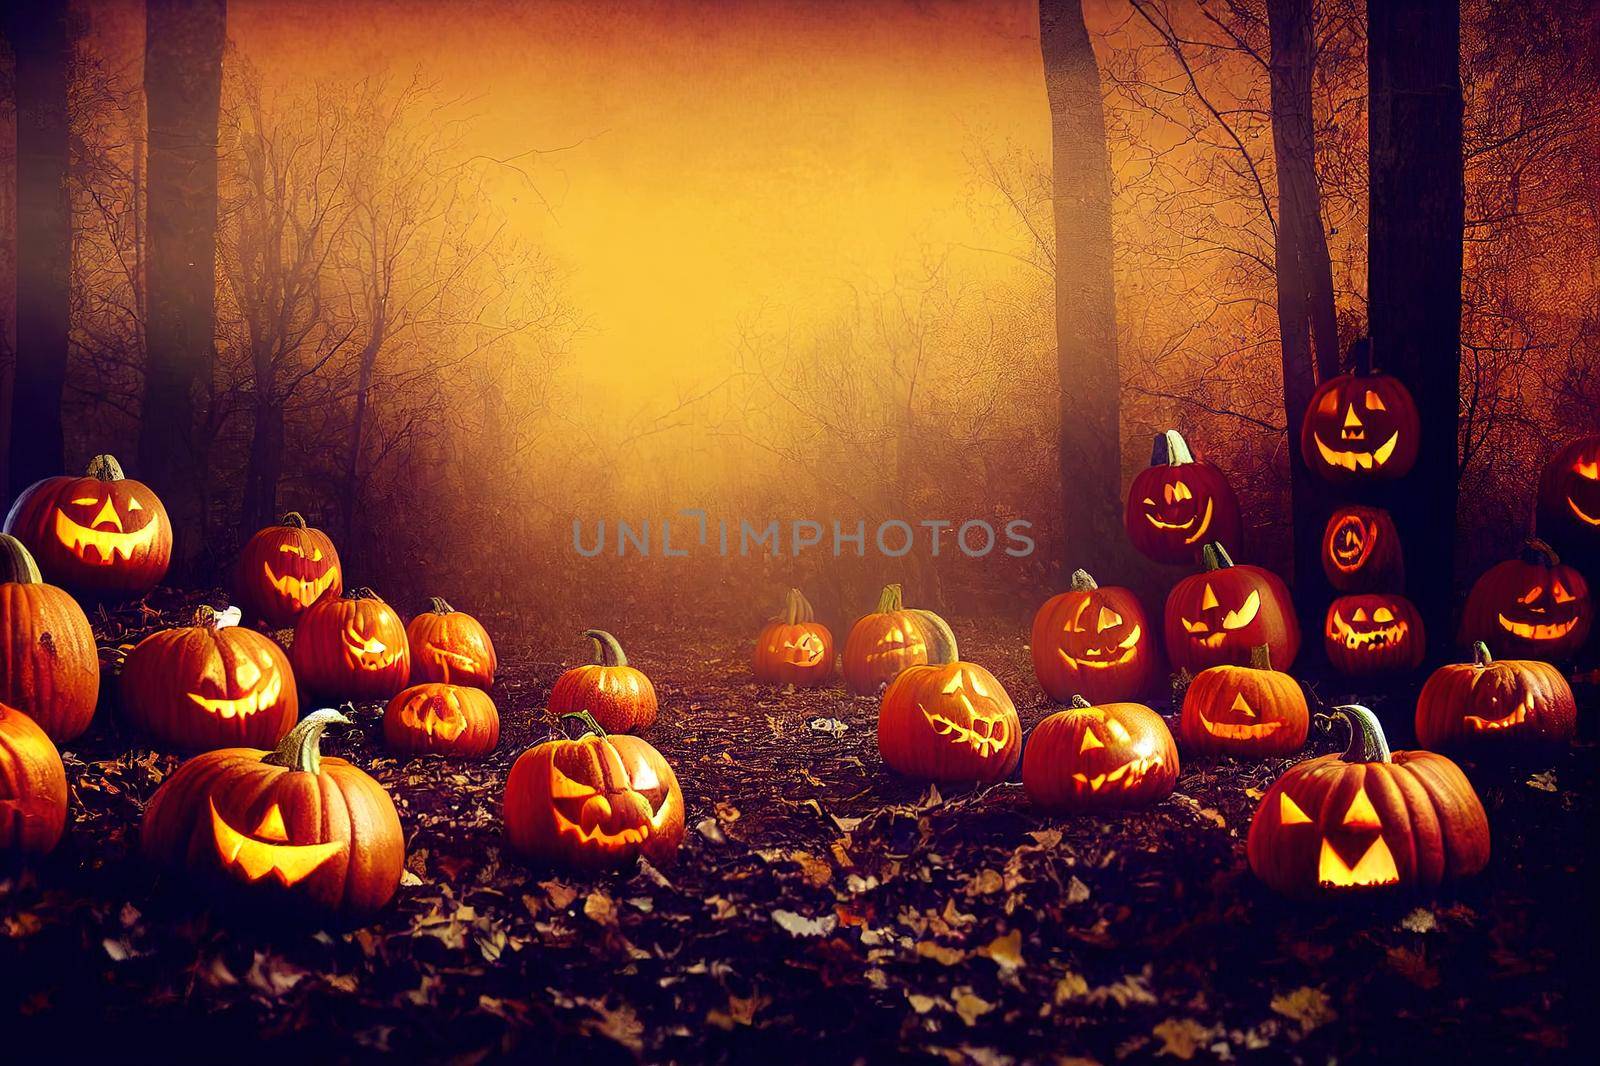 Halloween spooky background, scary pumpkins scene. Scary creepy forest in october dark night autumn gloomy creepy fall landscape with bokeh lights. Happy Halloween outdoor backdrop concept.. High quality illustration